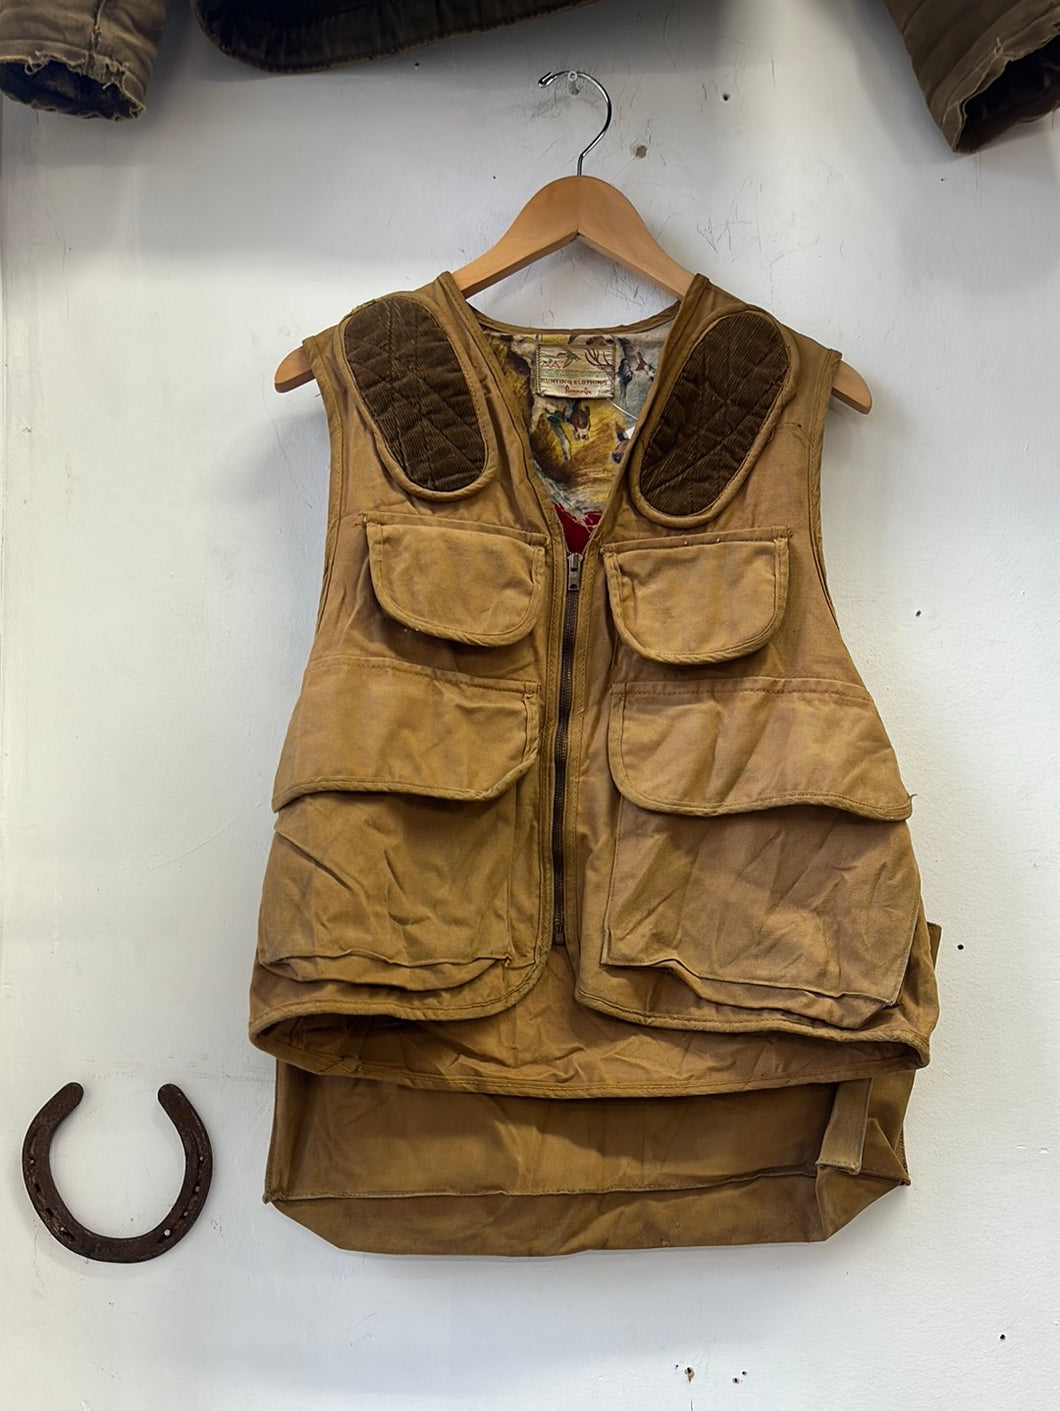 1960s/'70s Foremost Hunting Vest